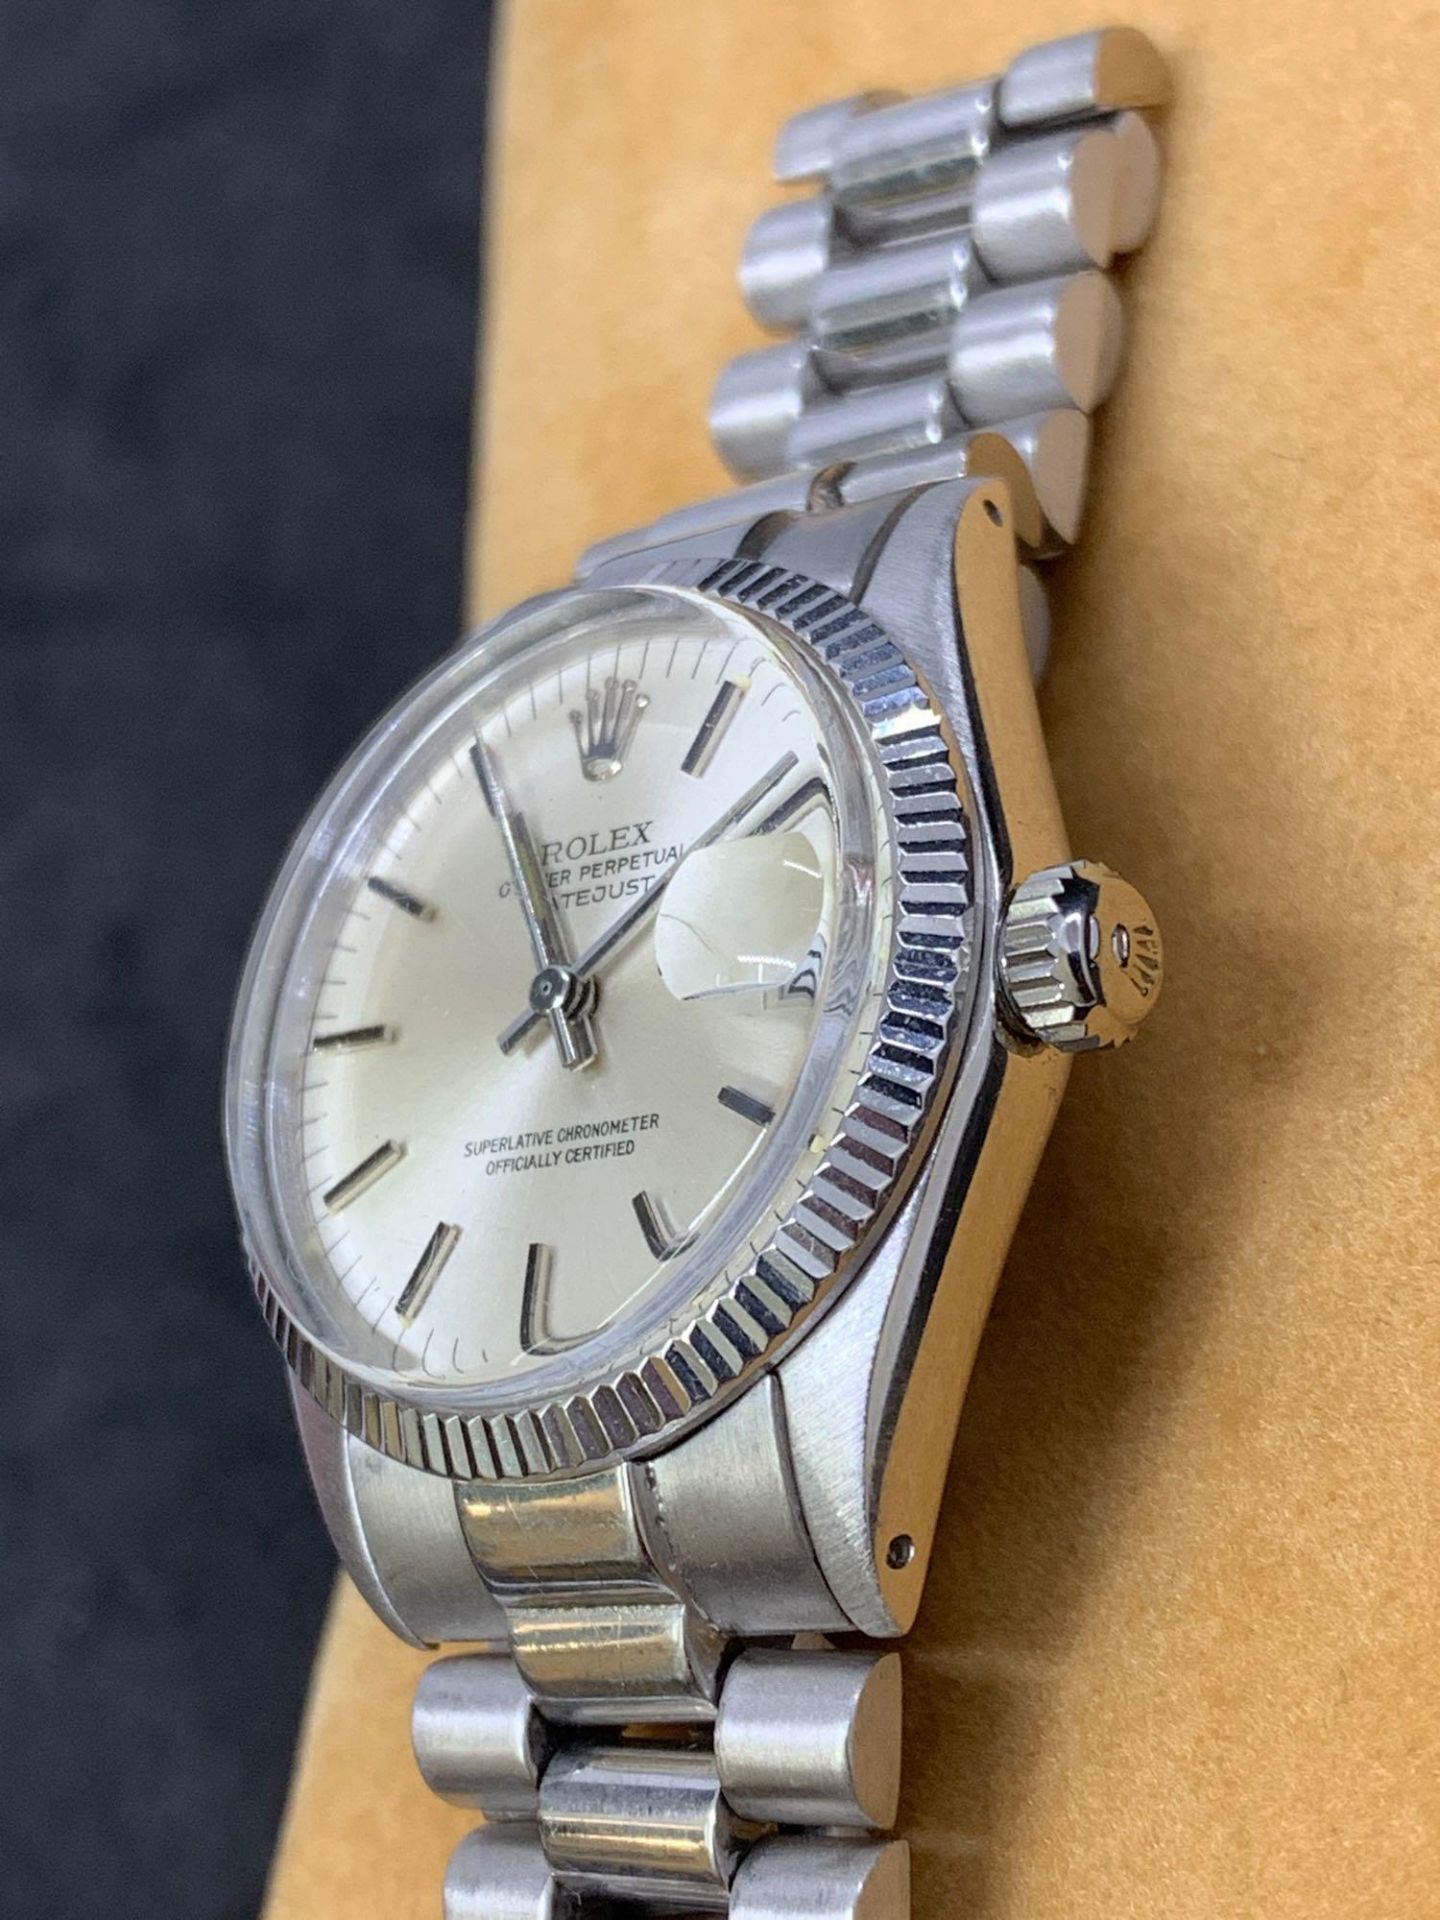 18ct White gold 31mm Rolex Watch - Image 5 of 7